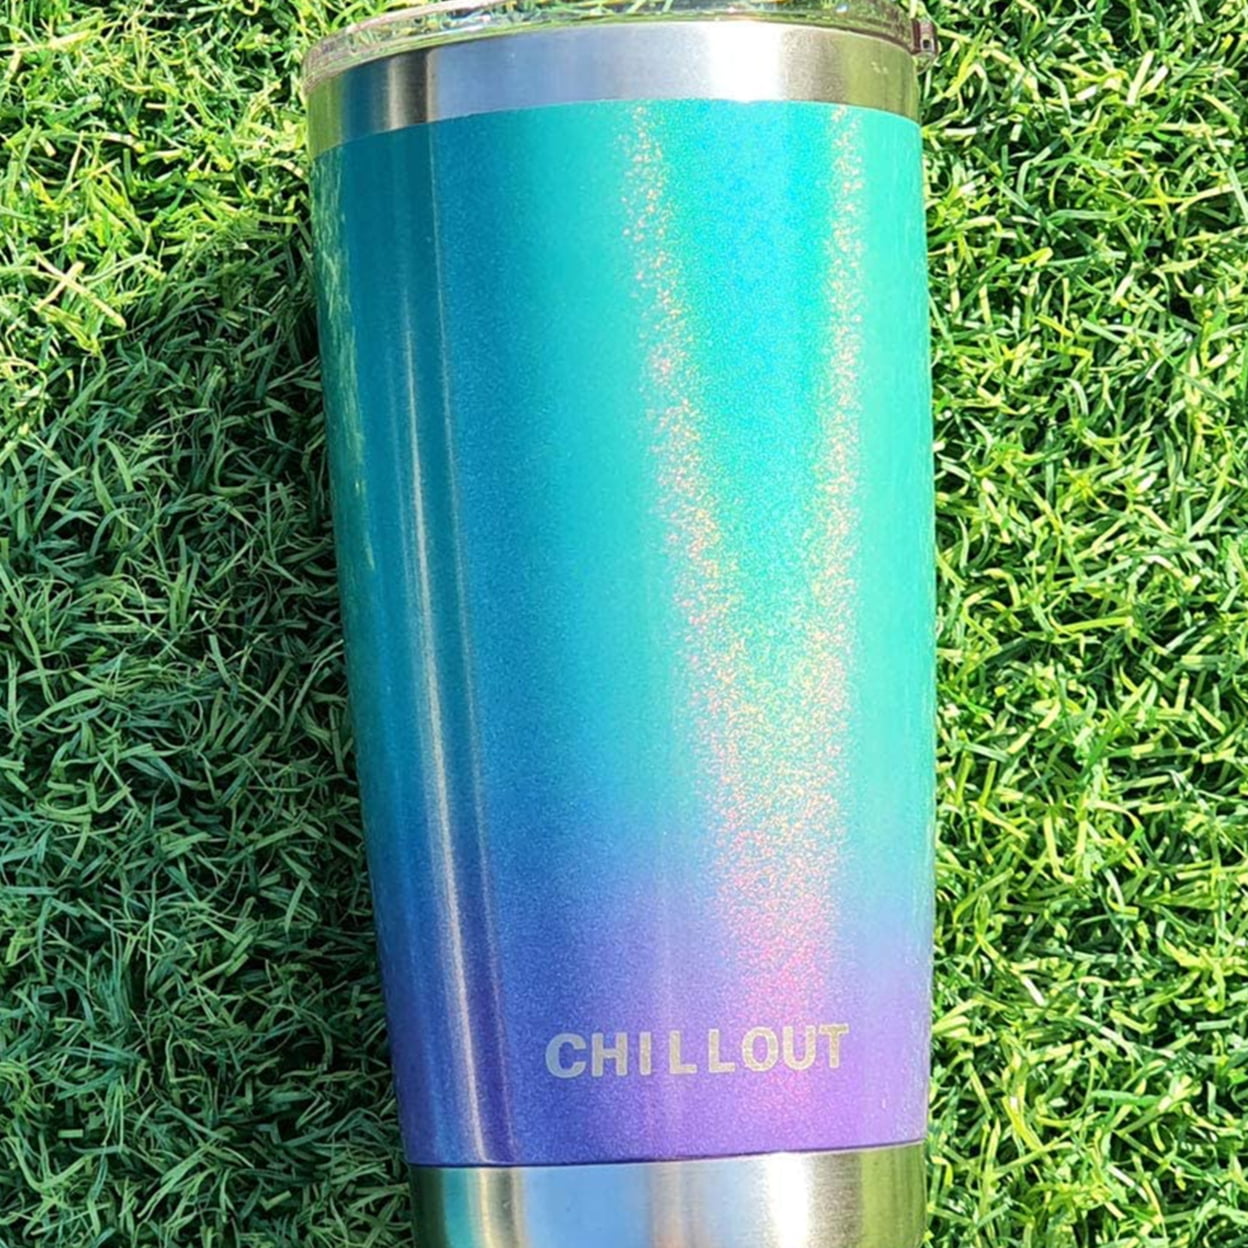 CHILLOUT LIFE Stainless Steel Travel Mug with Handle 40 oz – 6 Piece Set.  Tumbler with Handle, Straw, Cleaning Brush & 2 Lids. Double Wall Insulated  Large Coffee Mug Bundle